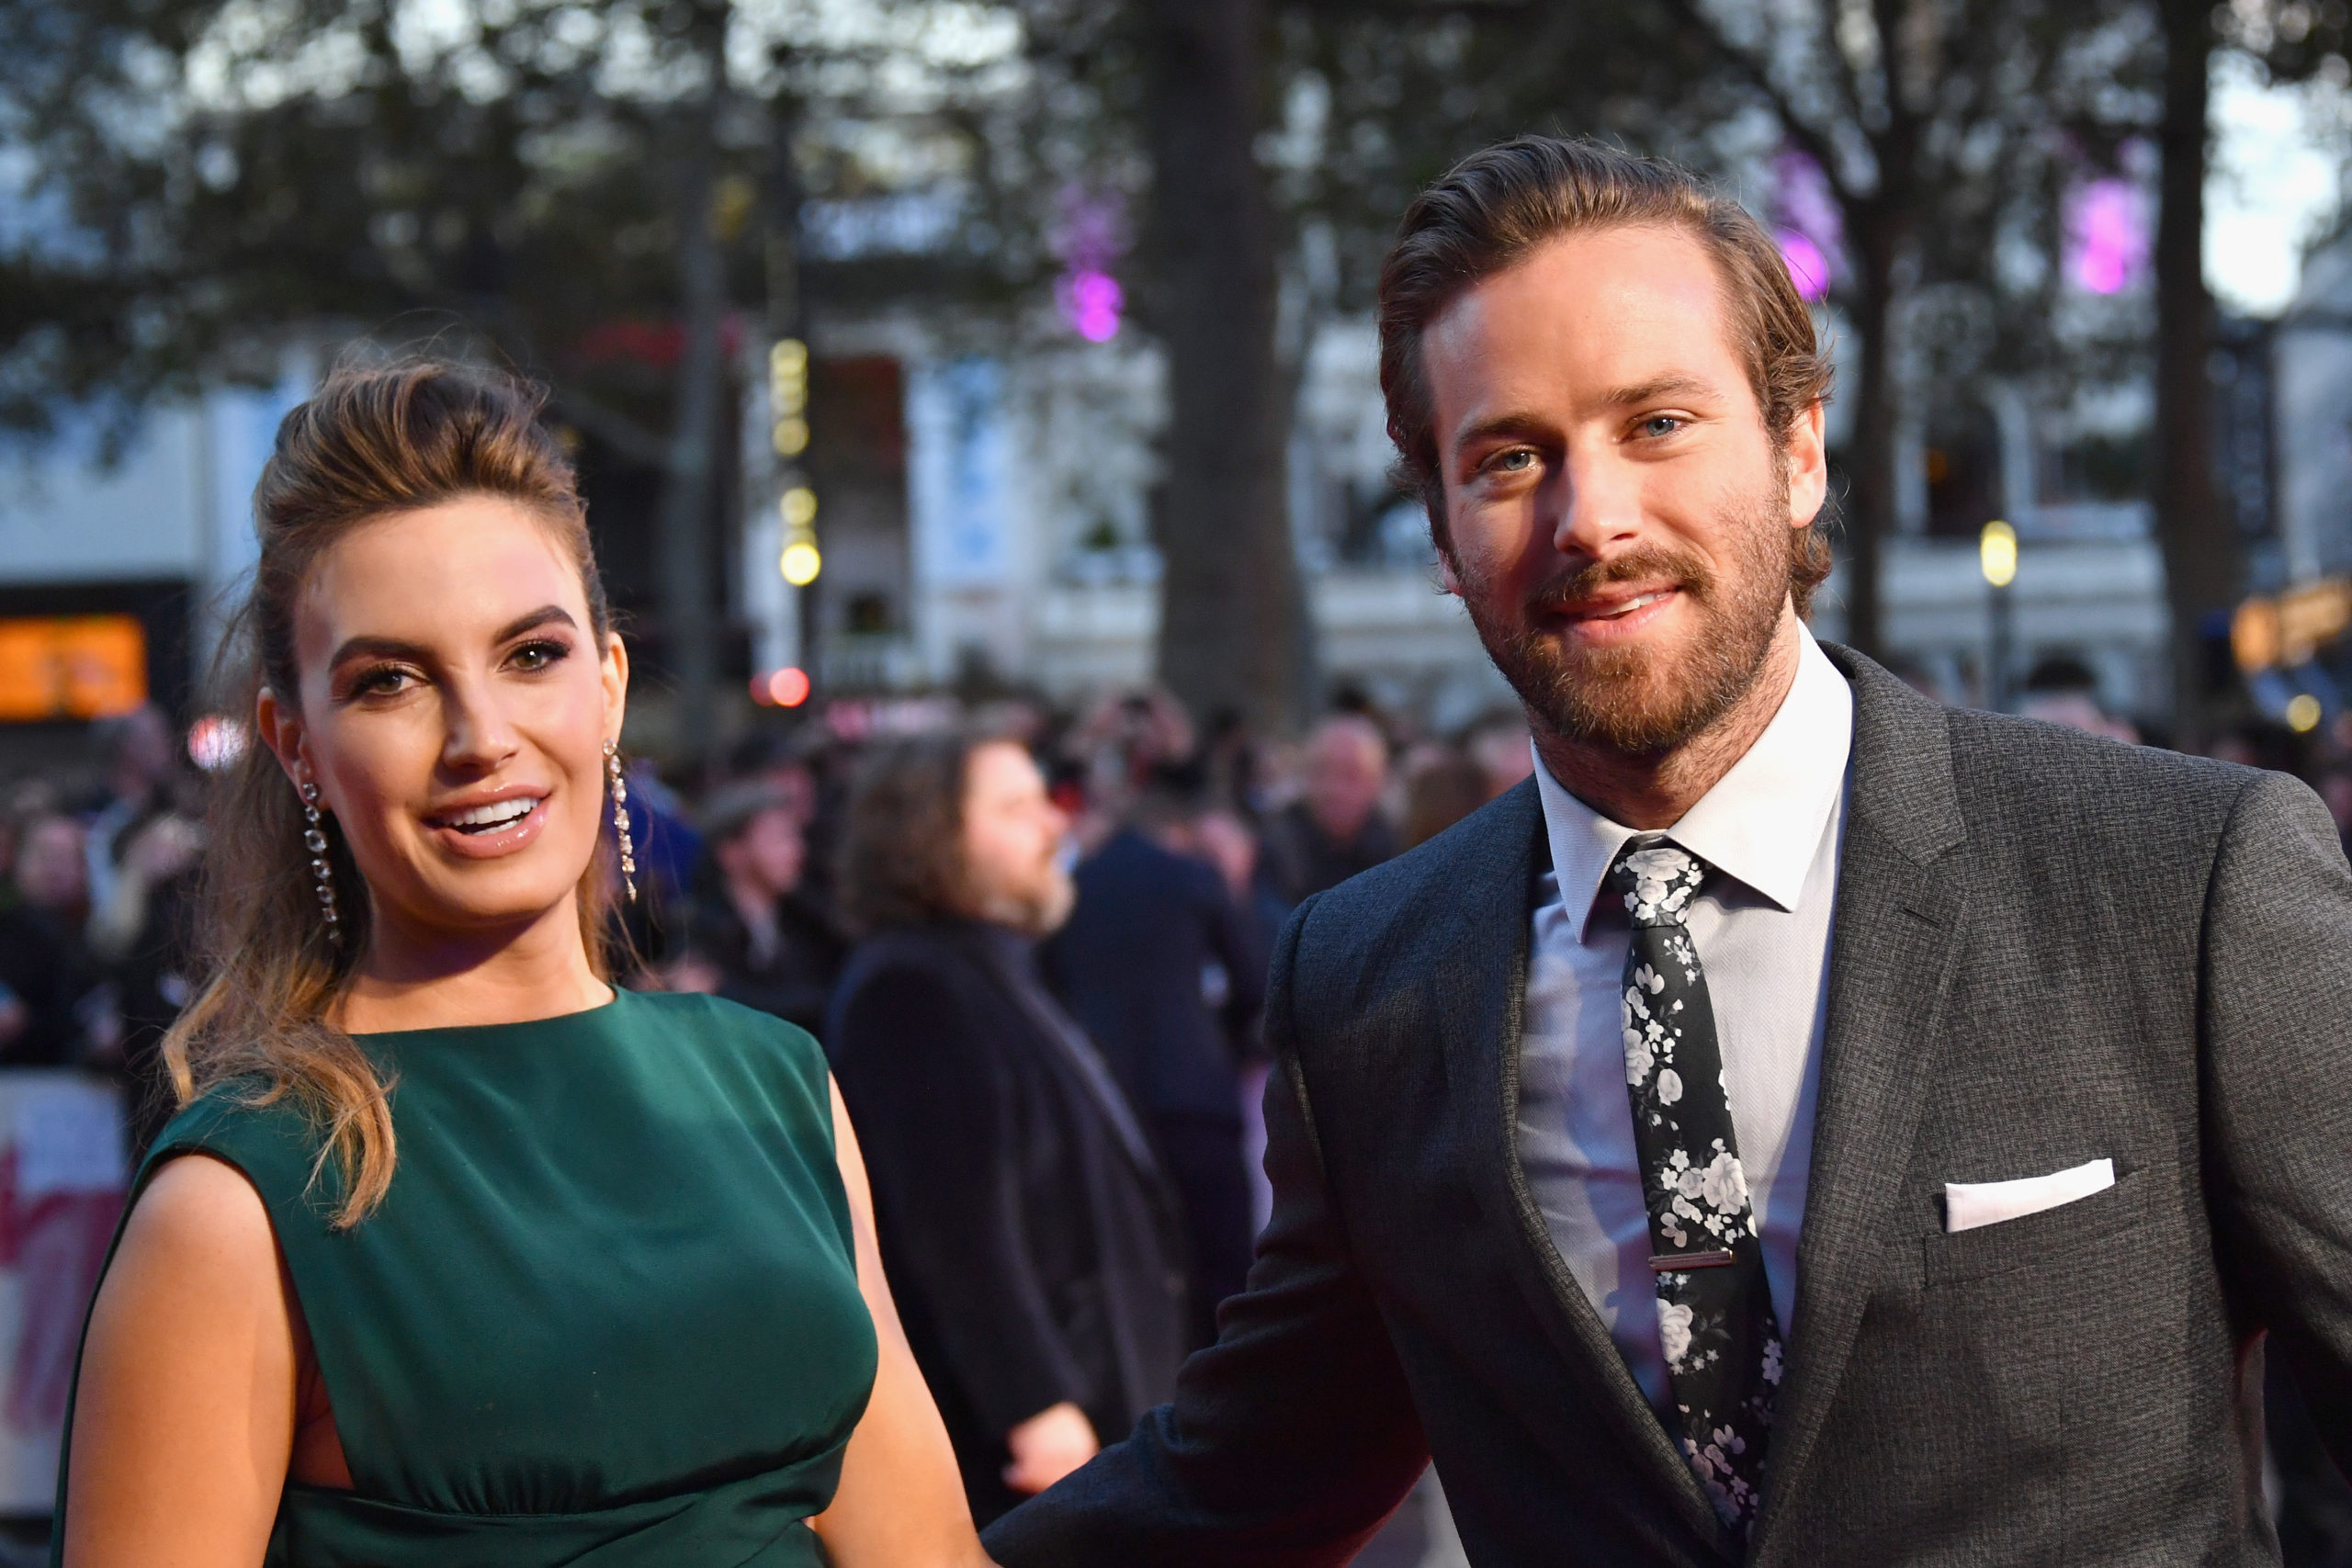 LONDON, ENGLAND - OCTOBER 16: Elizabeth Chambers and Armie Hammer attend the 'Free Fire' Closing Night Gala screening during the 60th BFI London Film Festival at Odeon Leicester Square on October 16, 2016 in London, England. (Photo by Gareth Cattermole/Getty Images for BFI)